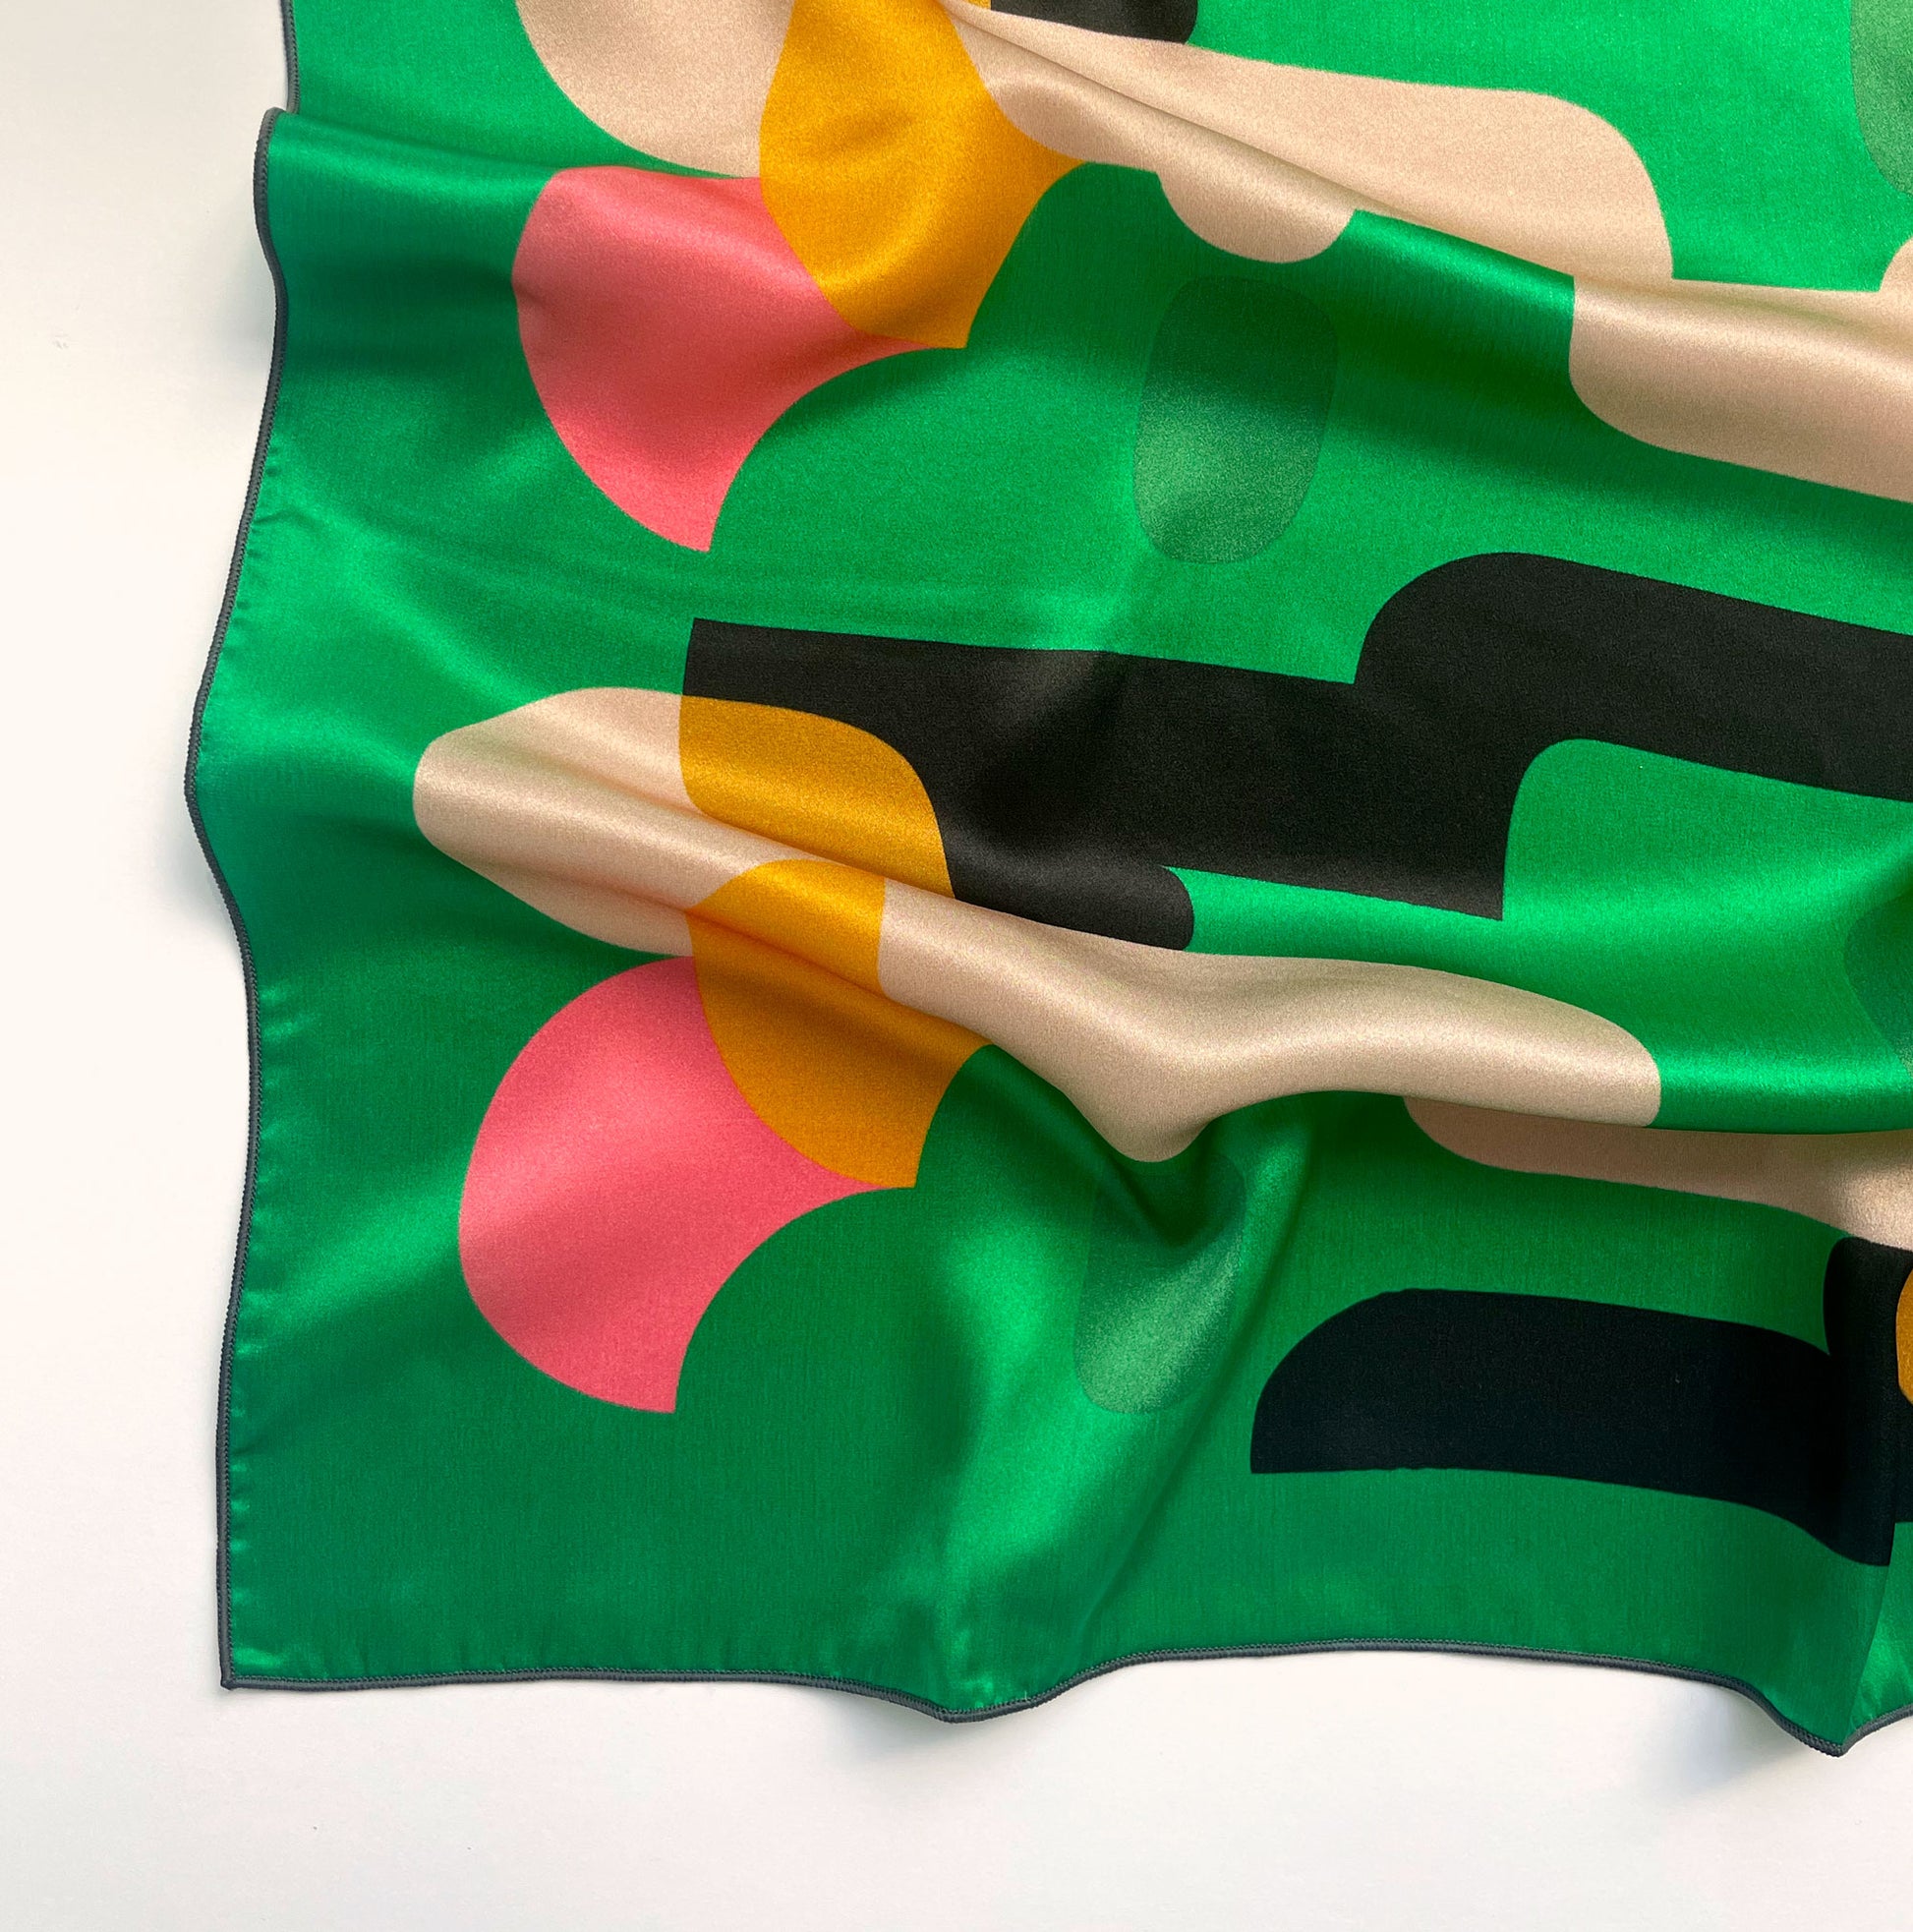 The retro abstract shape of Green Meanies has a modern feel that's easy to wear as a neck scarf, hair scarf, or accessorize your purse with.